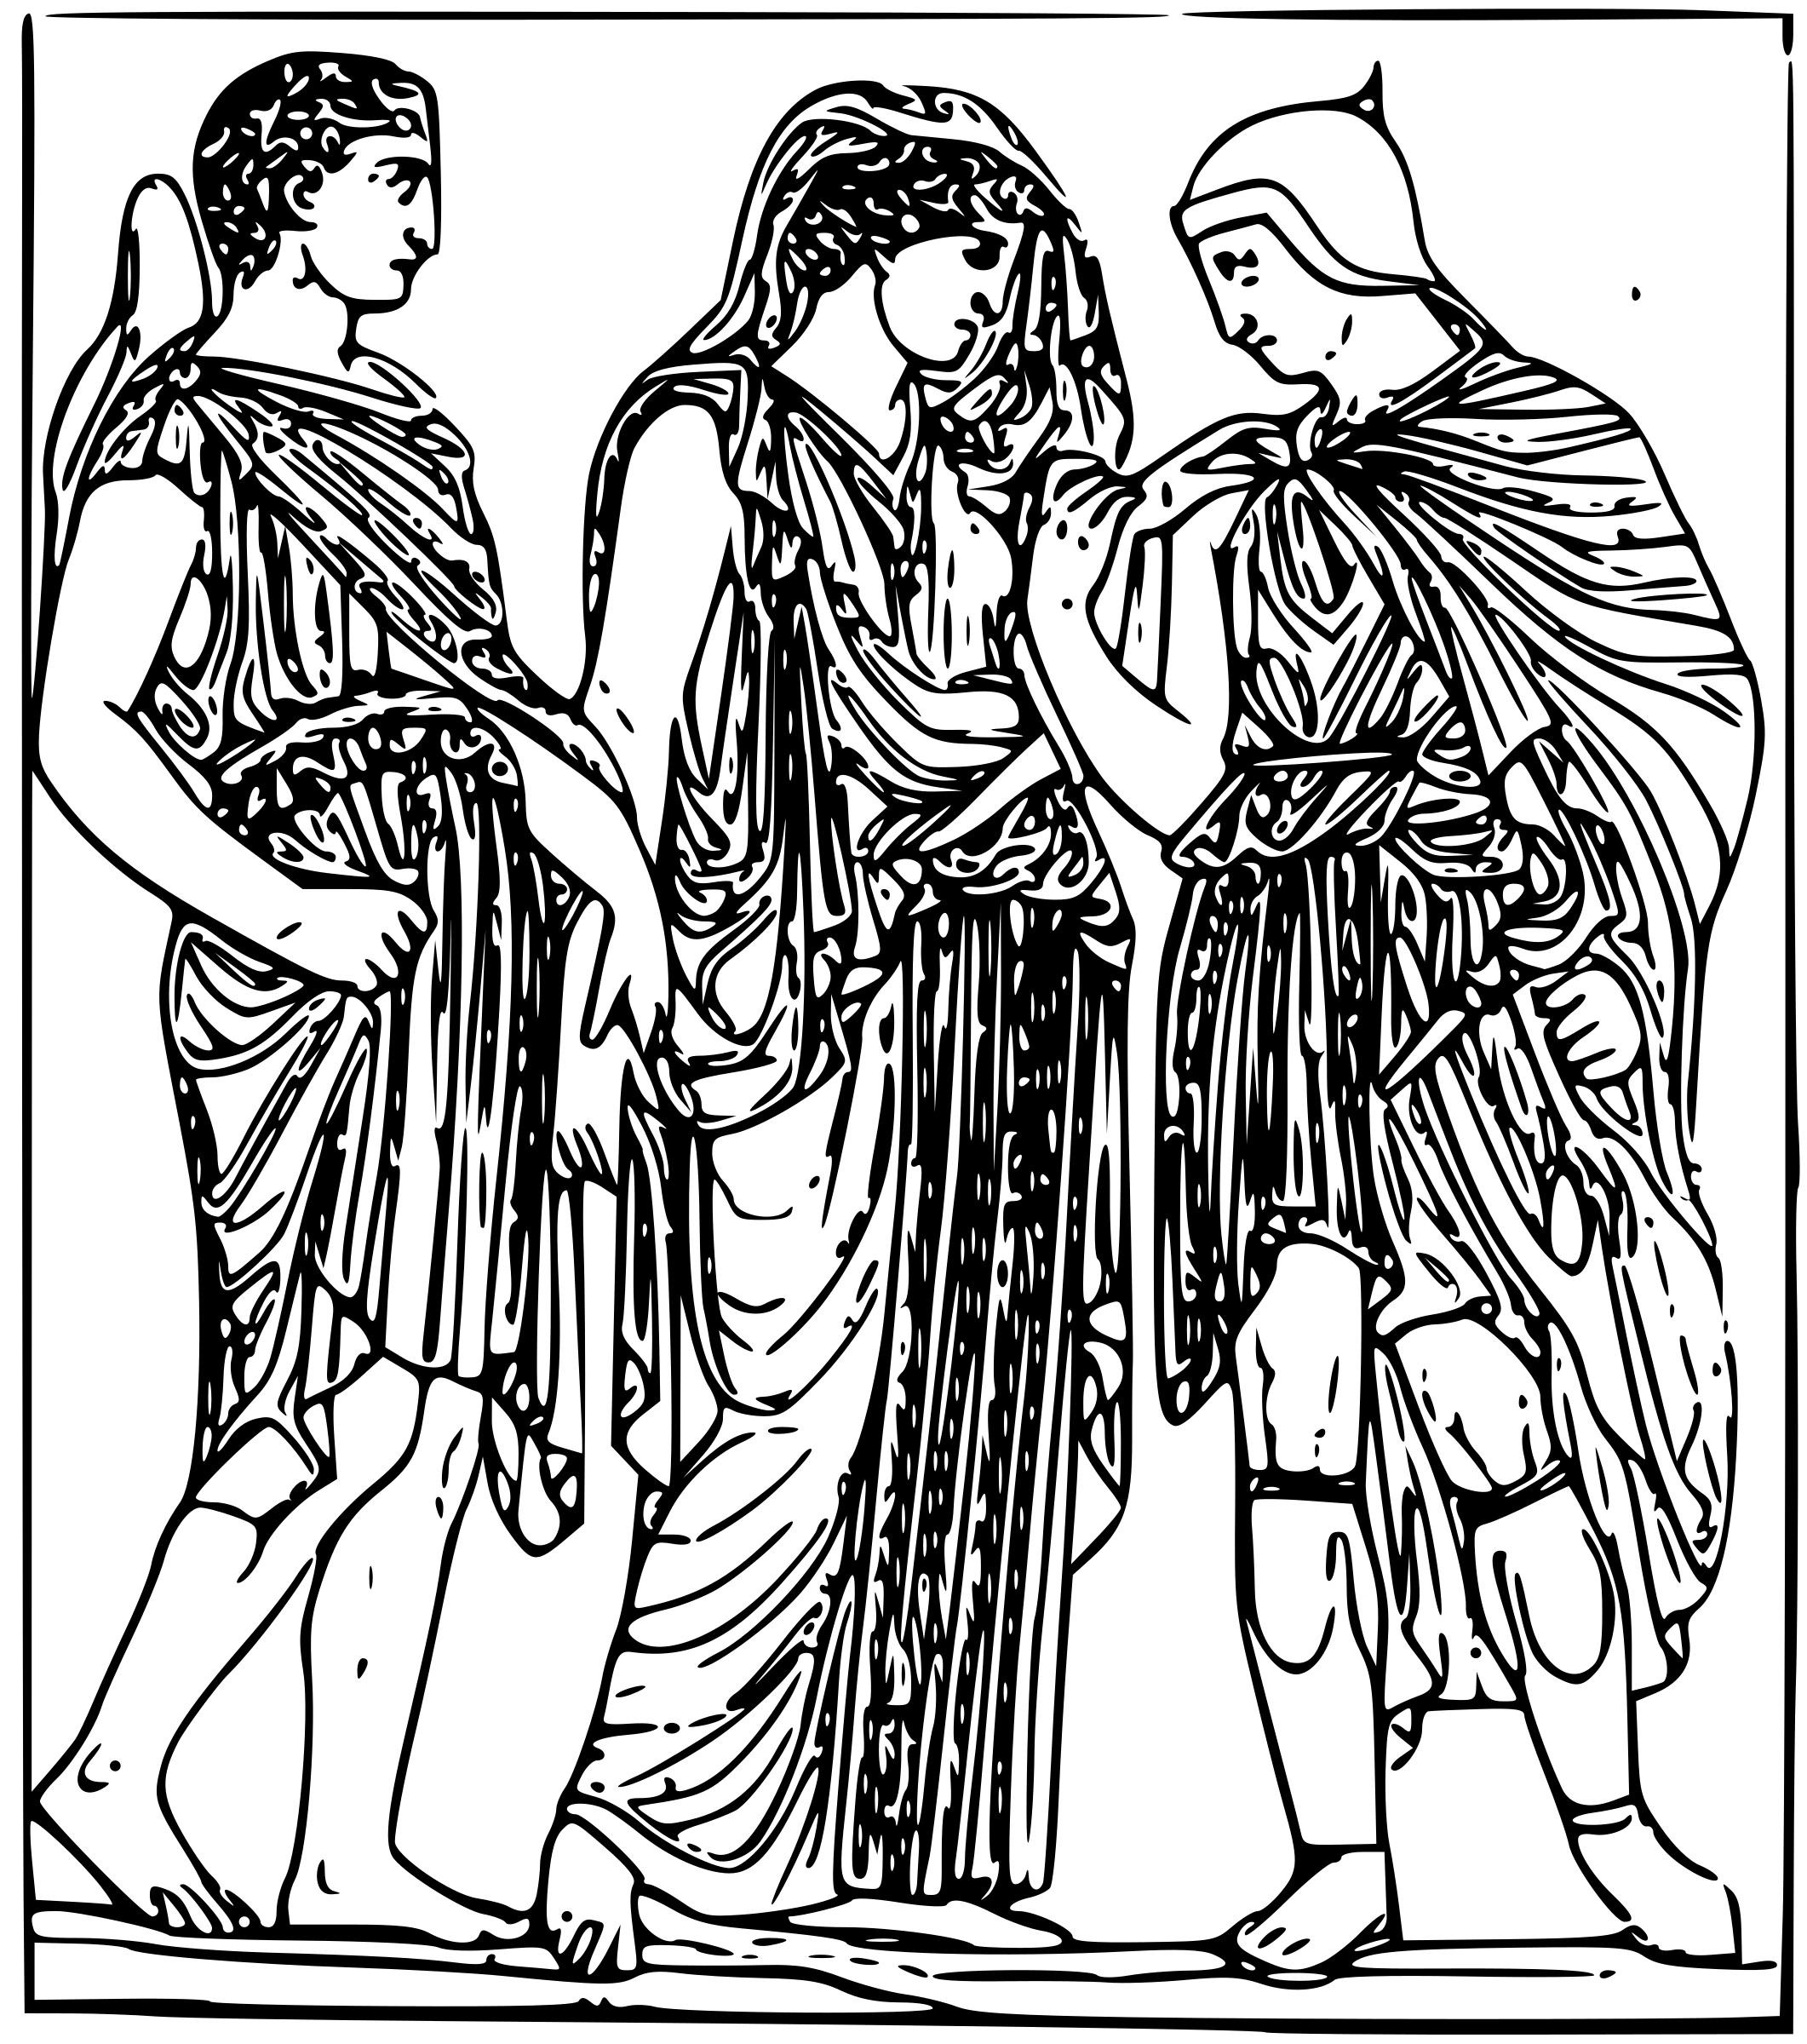 Hermes, Orpheus and Eurydice png